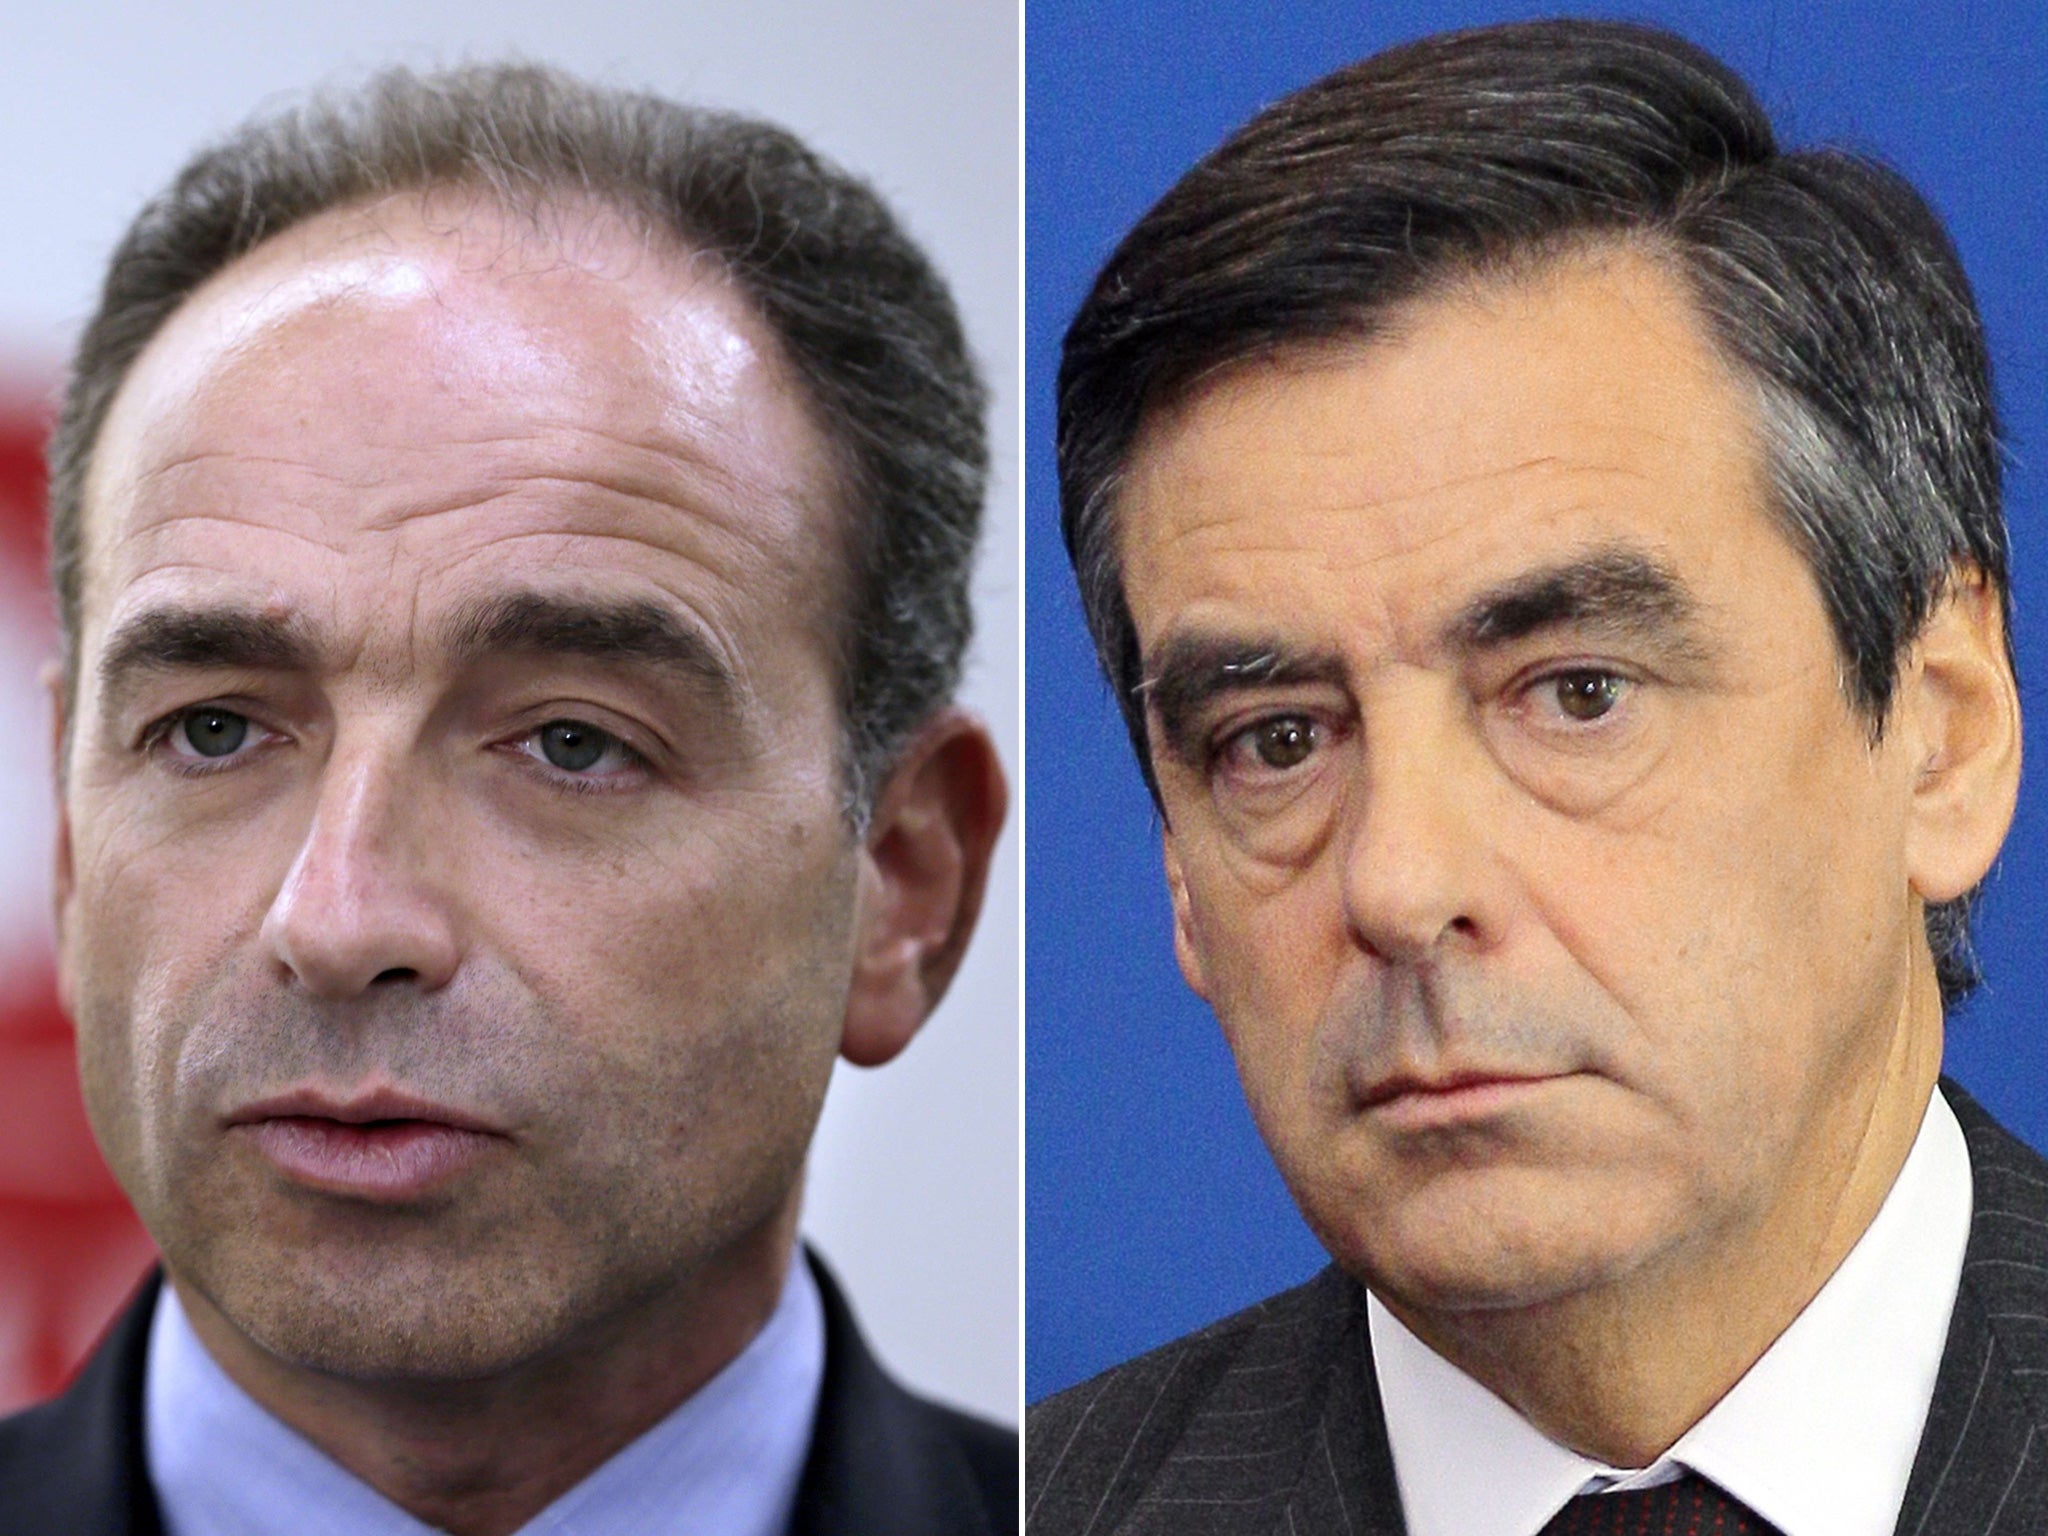 Newly-elected President of the right-wing UMP opposition party, Jean-Francois Cope(l), who beat former Prime Minister, Francois Fillon (r) in a shambolic battle to lead France's right-wing opposition.